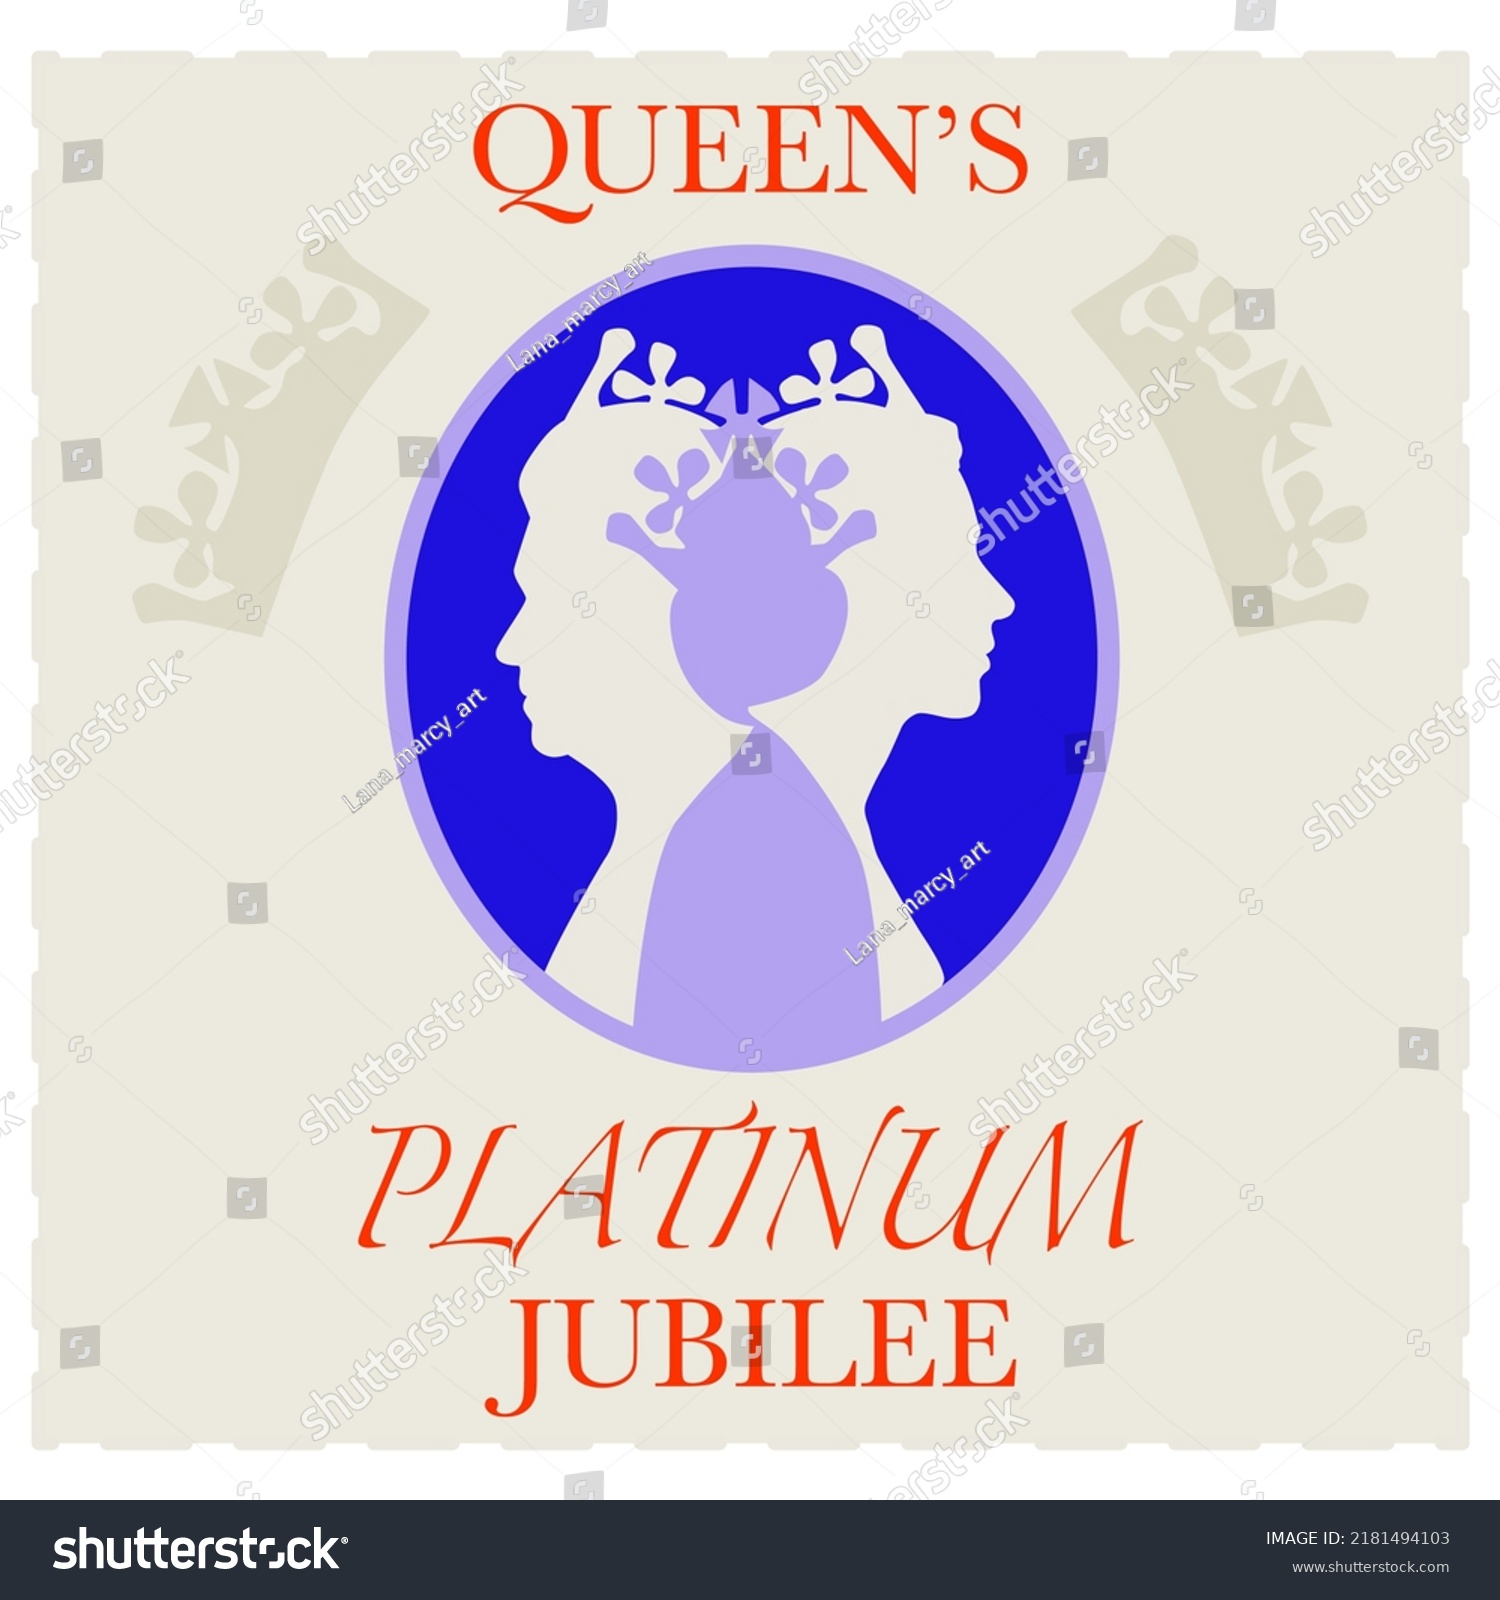 SVG of The Queen’s Platinum Jubilee celebration poster. Queen Elizabeth side profiles. Design for banners, postcards, posters, stickers or greeting cards. svg